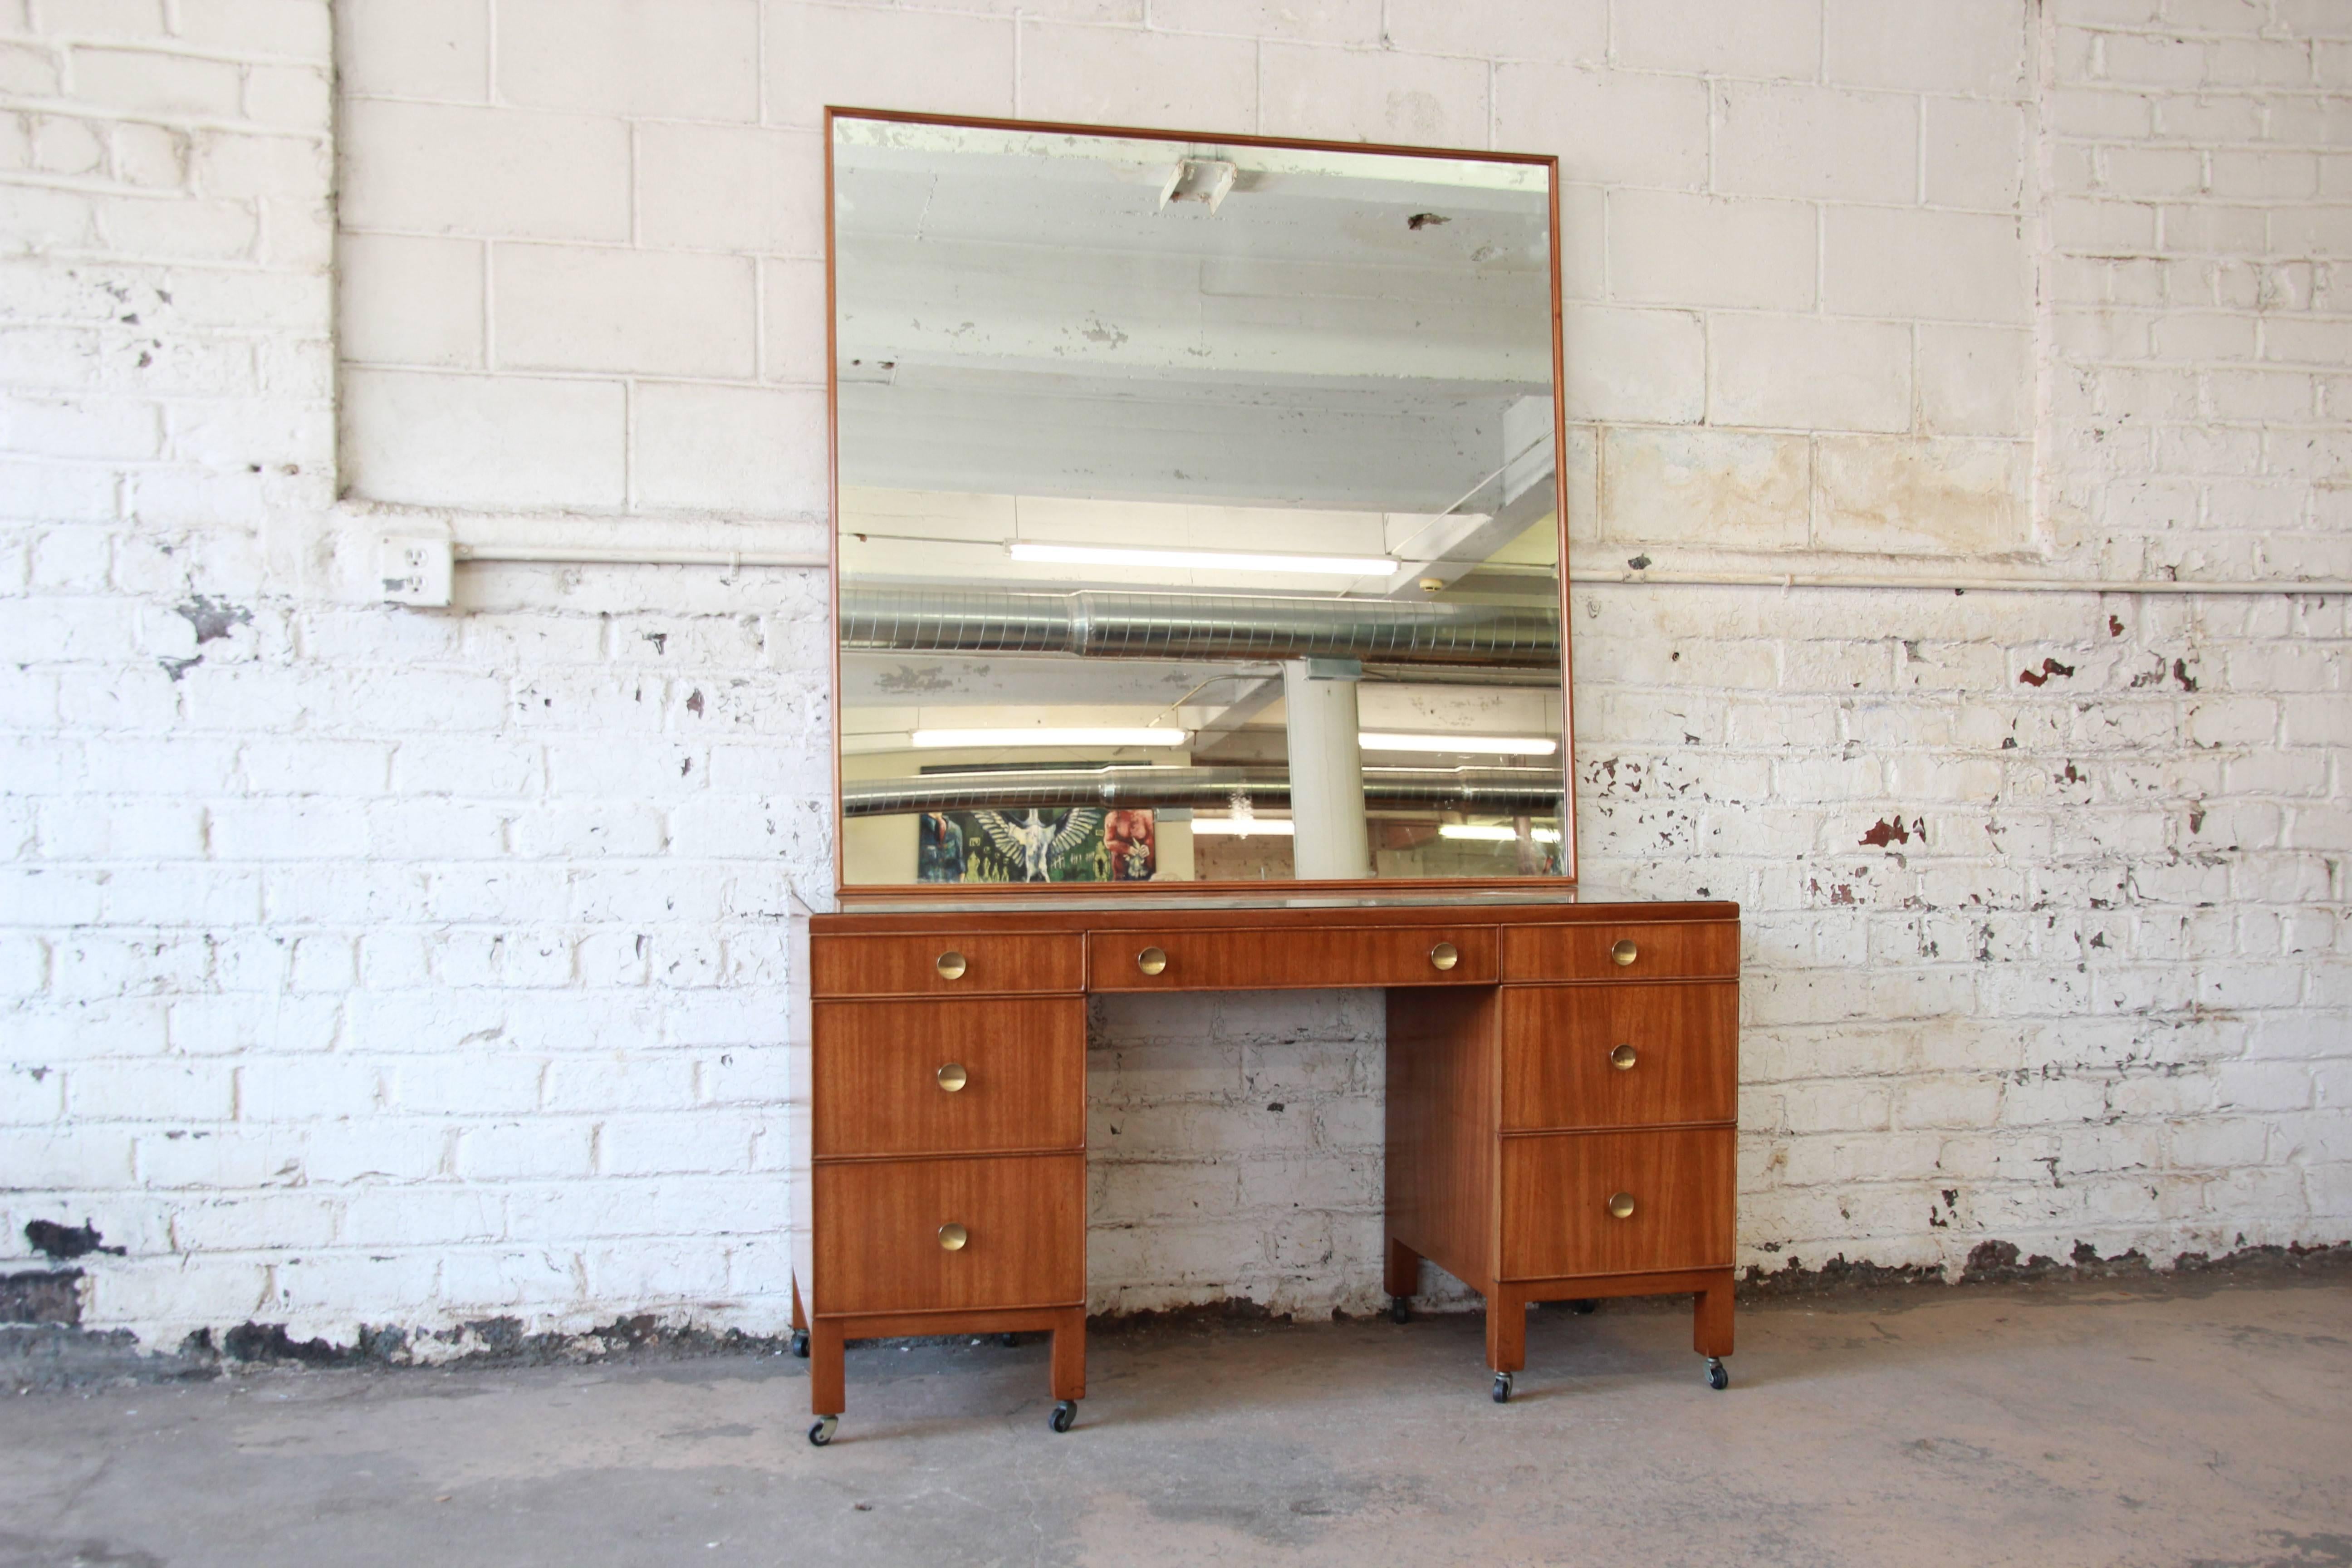 Offering a very rare and early vanity and mirror by Edward Wormley for Dunbar. The vanity offers seven drawers for ample storage. It has original brass pulls with an inset glass top and sits on casters. The large matching mirror extends to nearly